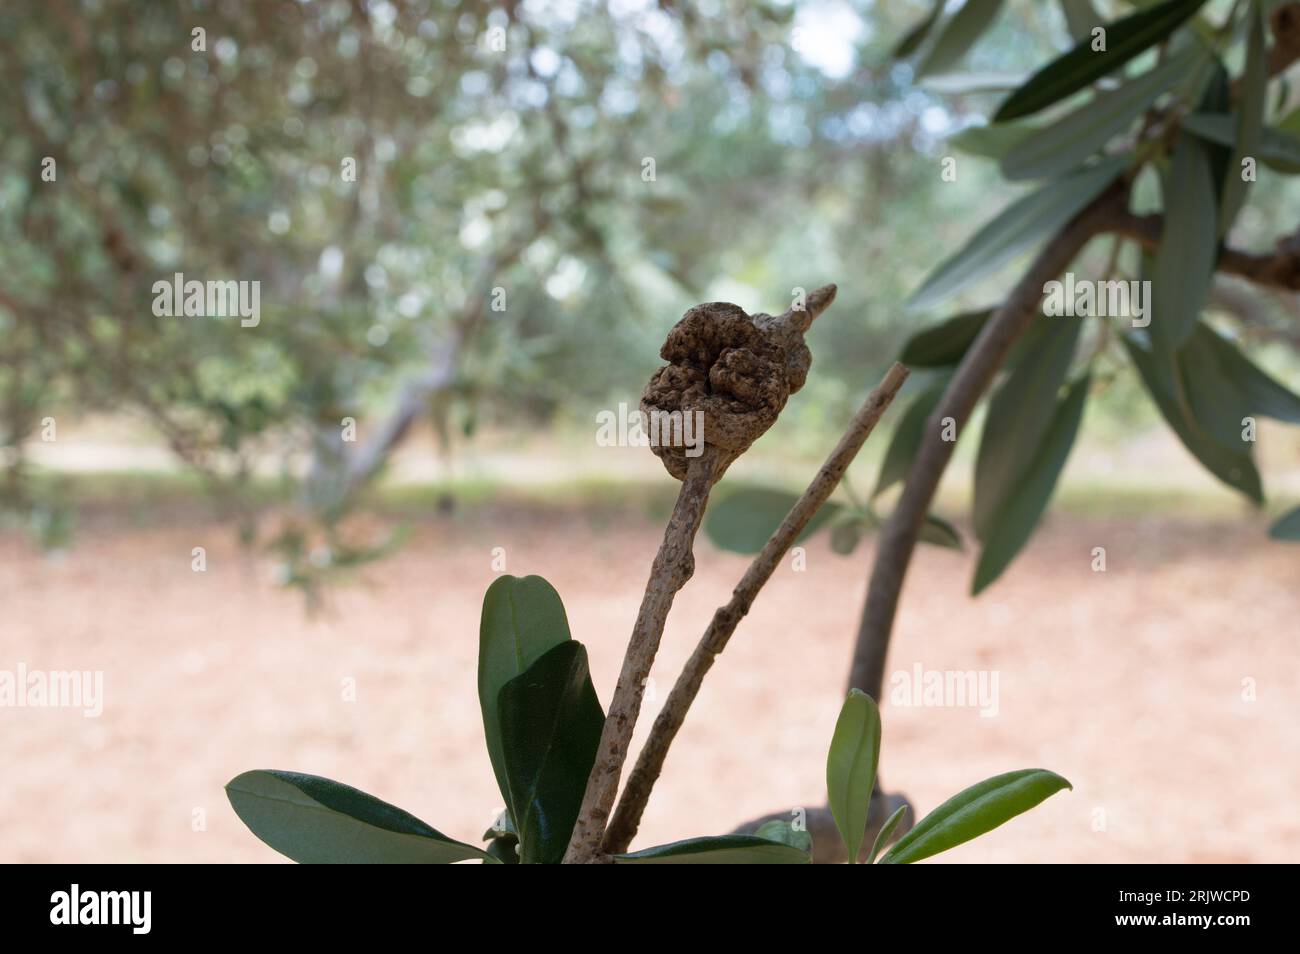 Close up of bump on the infected olive tree branch, olive knot disease caused by the pathogen Pseudomonas savastanoi, Olea Europea in Dalmatian area, Stock Photo